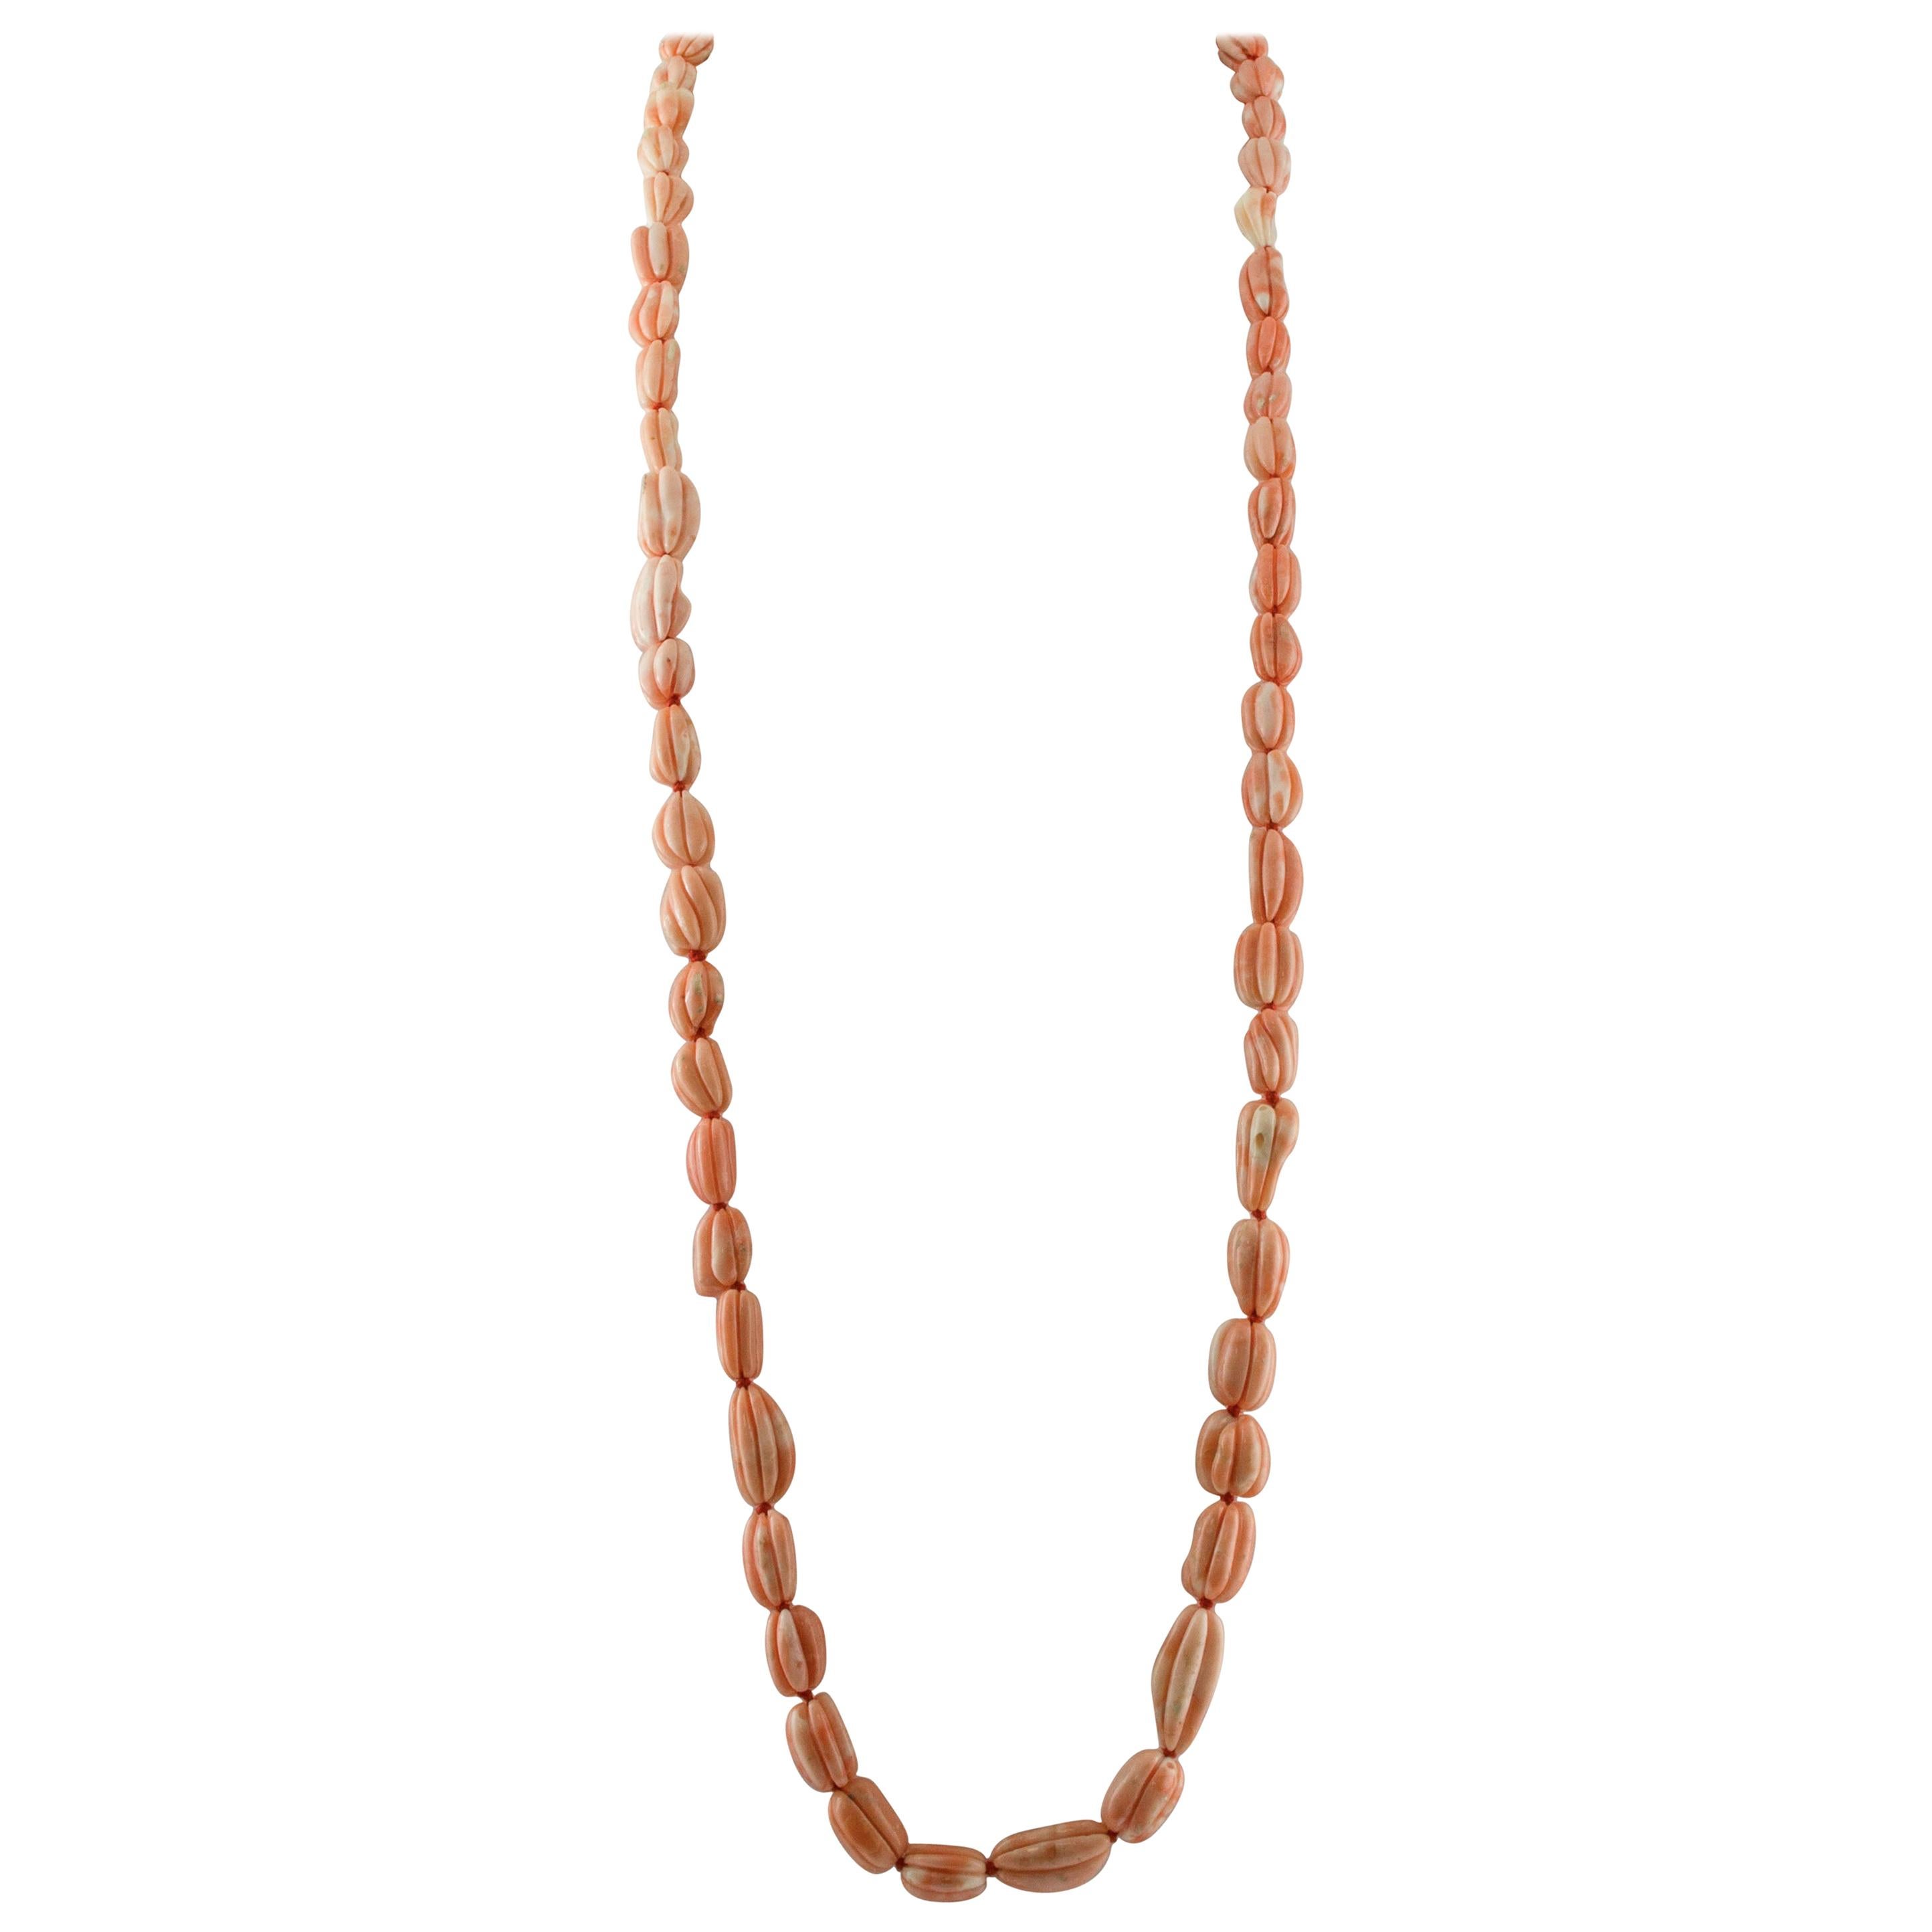 117.3 g Orange/Pink Coral Beaded/Multi-Strand Long Necklace.